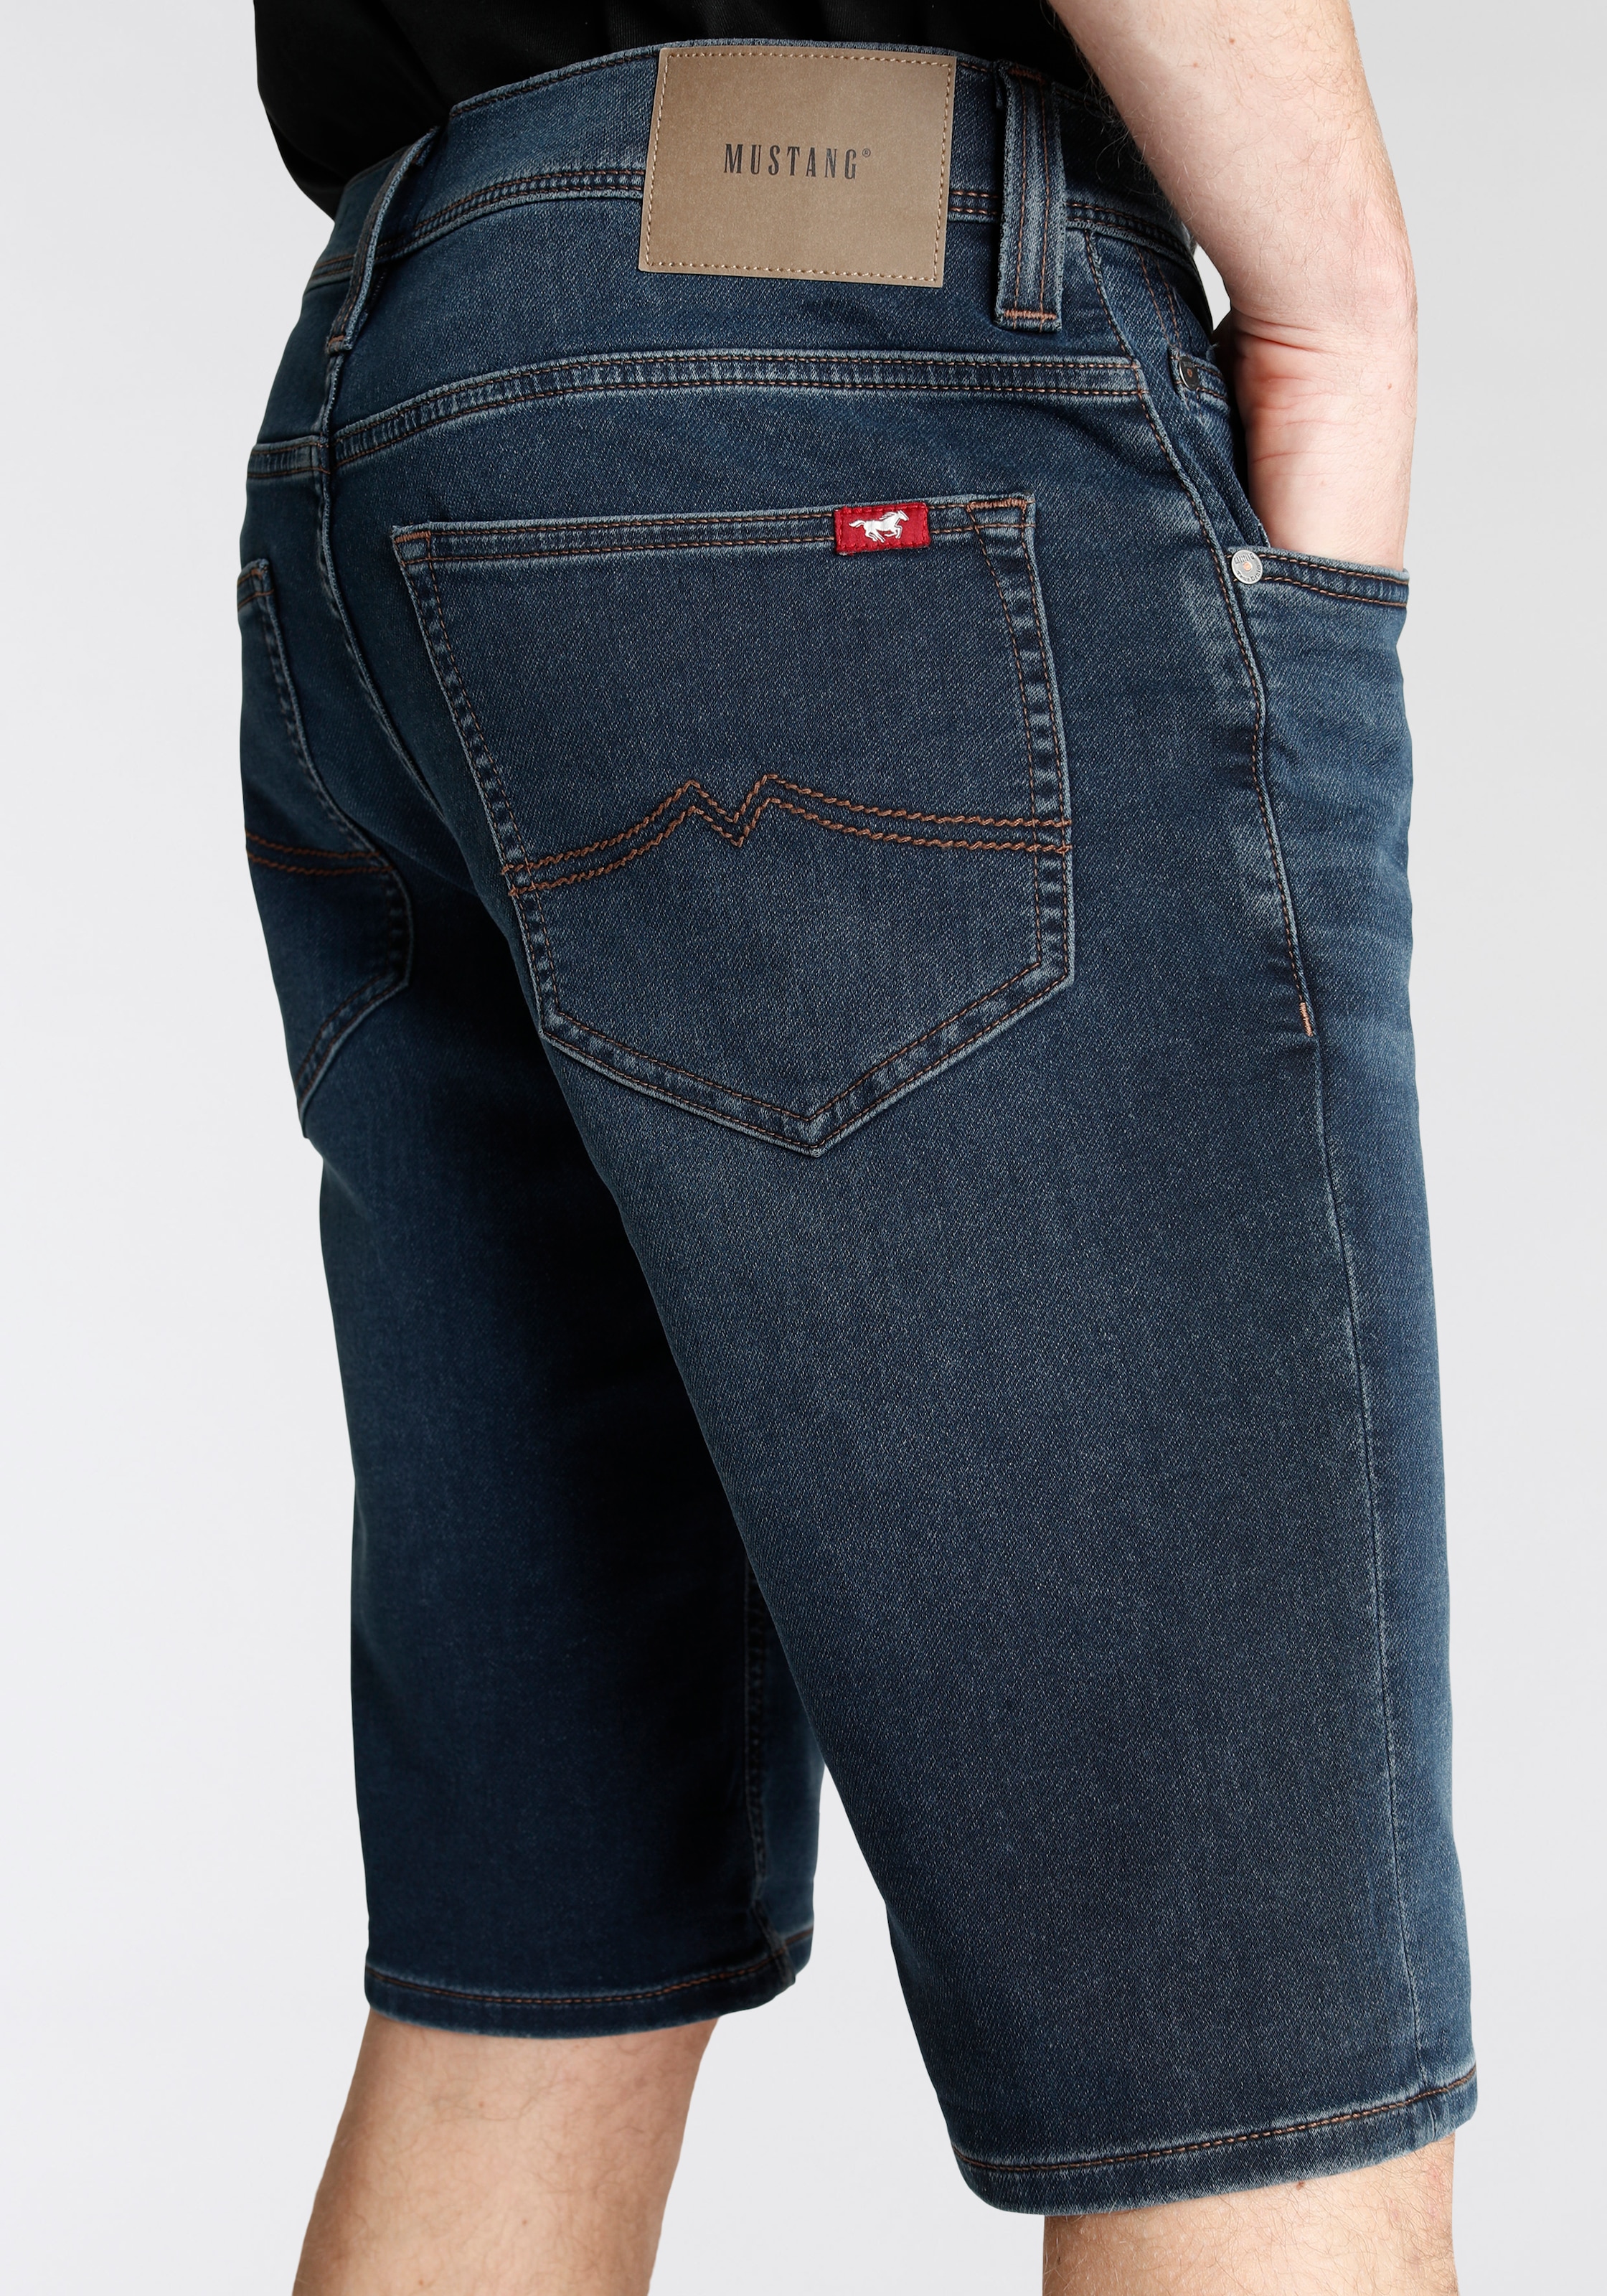 ♕ Chicago« MUSTANG »Style bei Jeansshorts